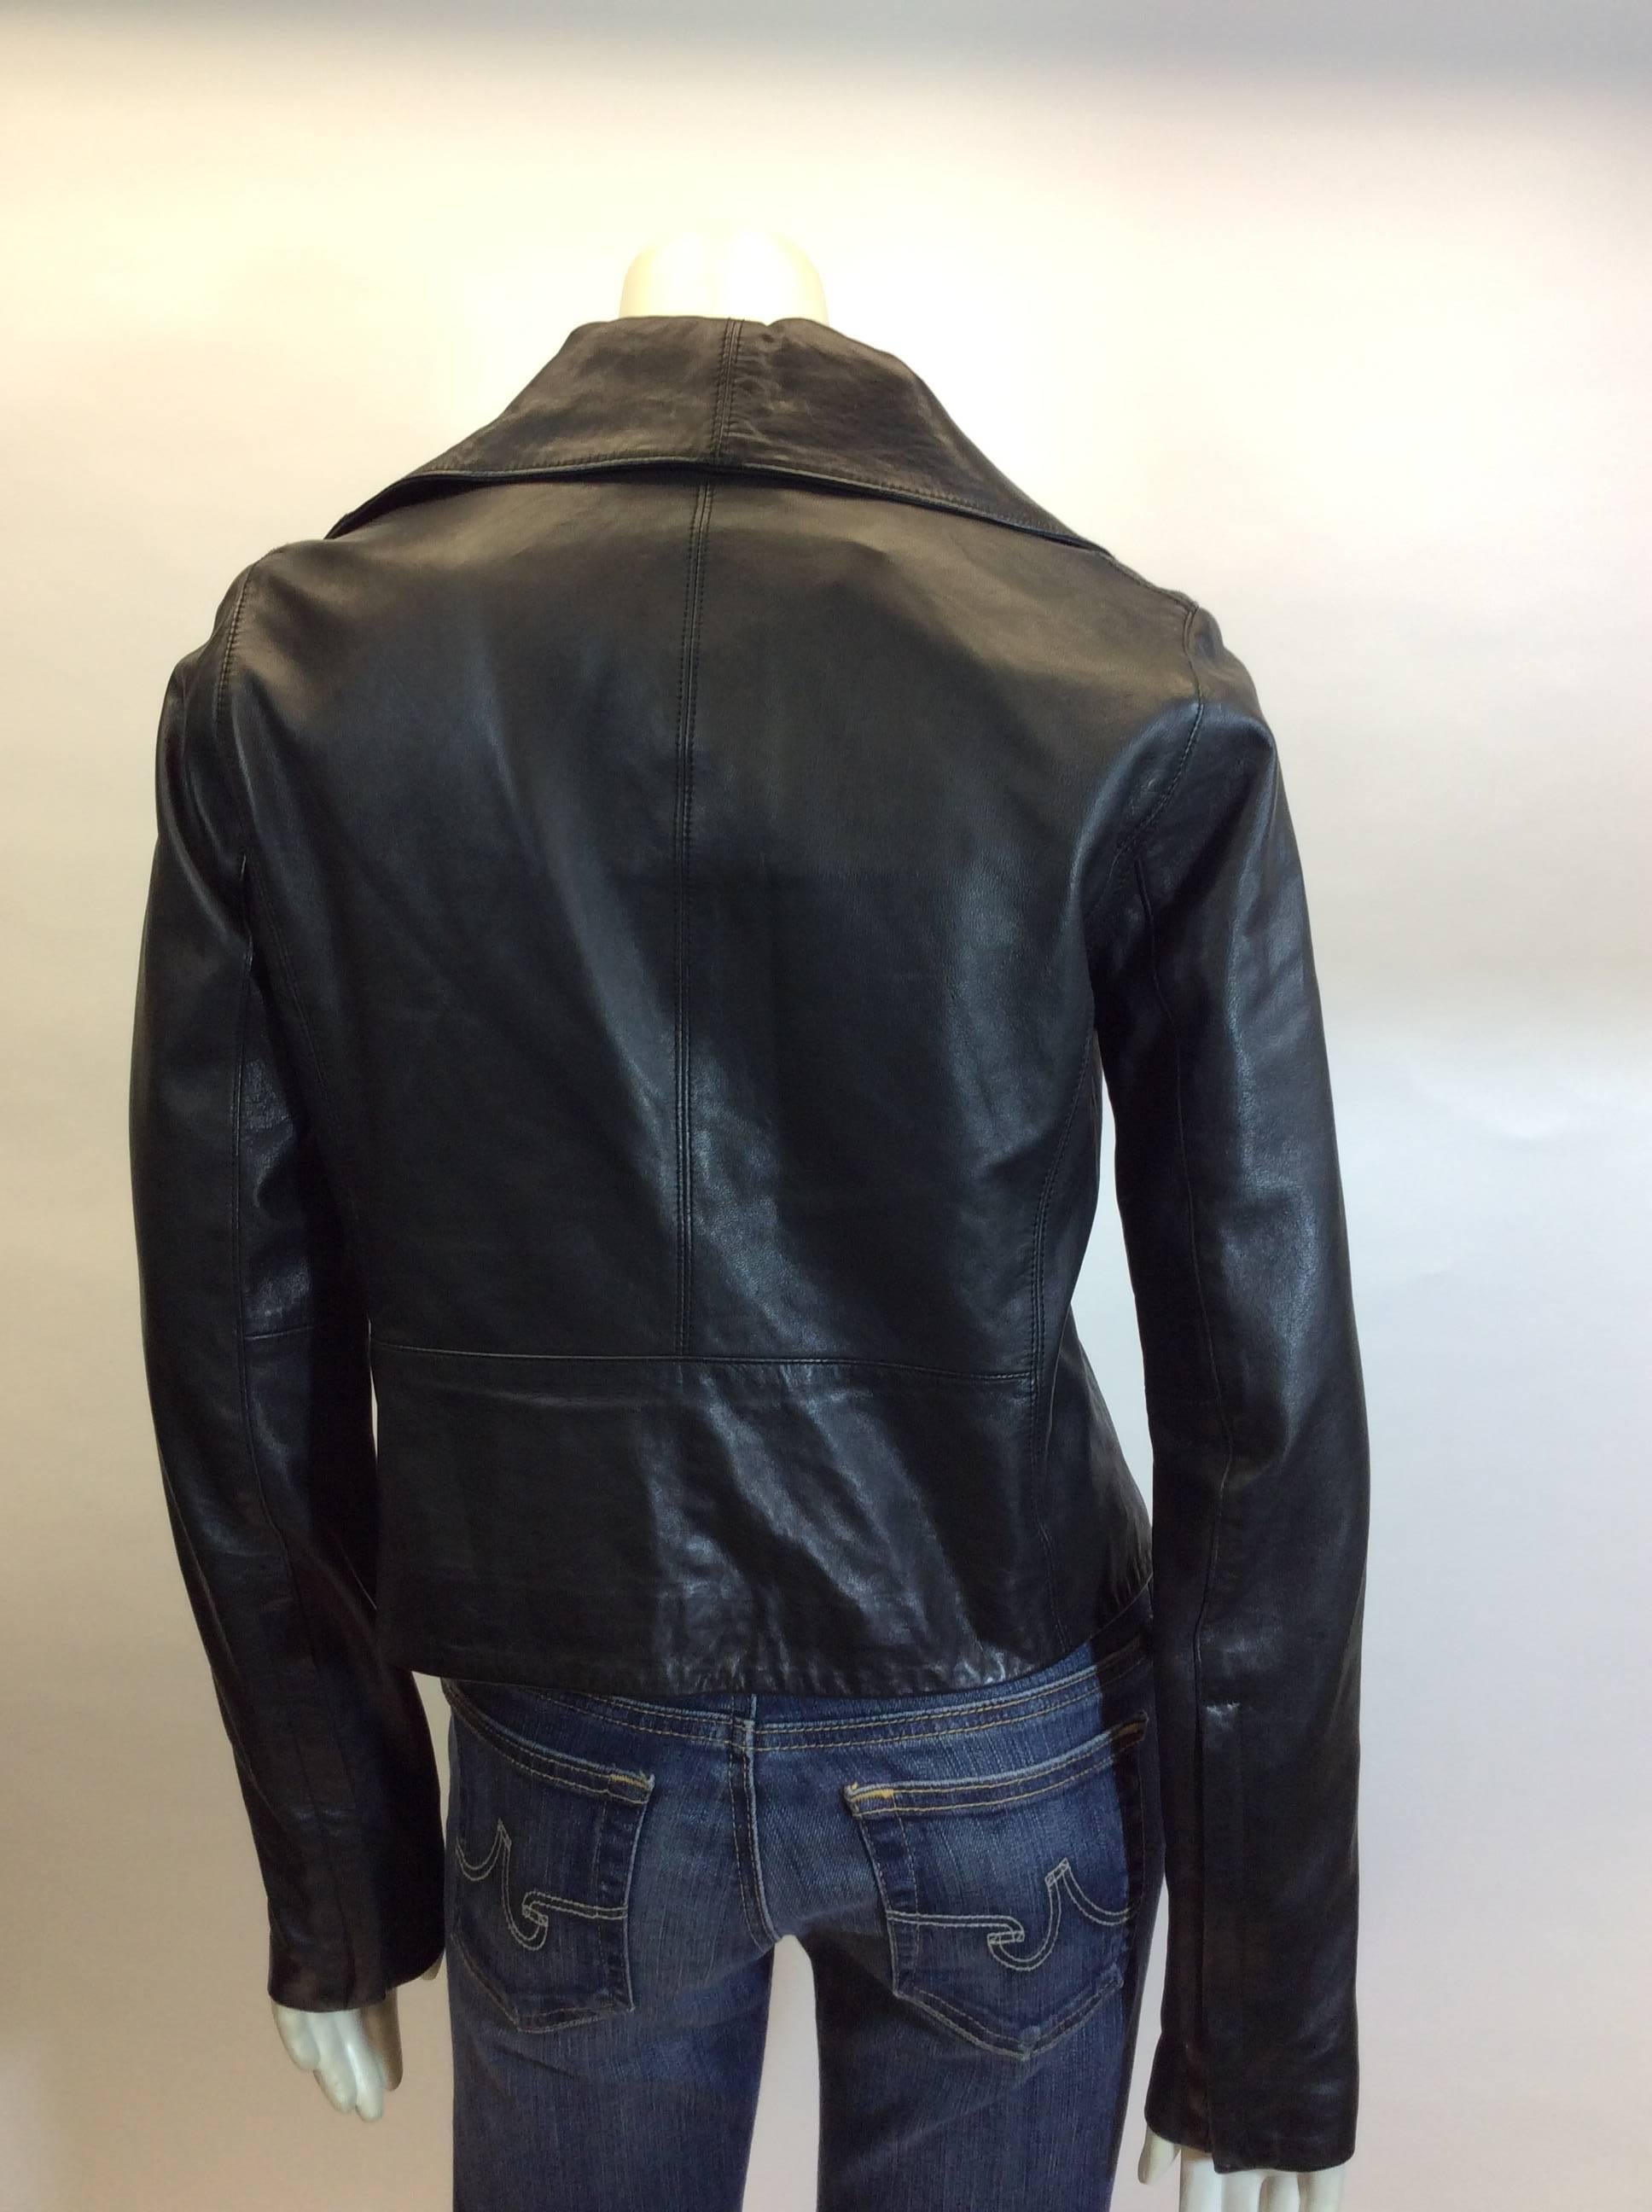 Vince Black Leather Moto Jacket In Excellent Condition For Sale In Narberth, PA